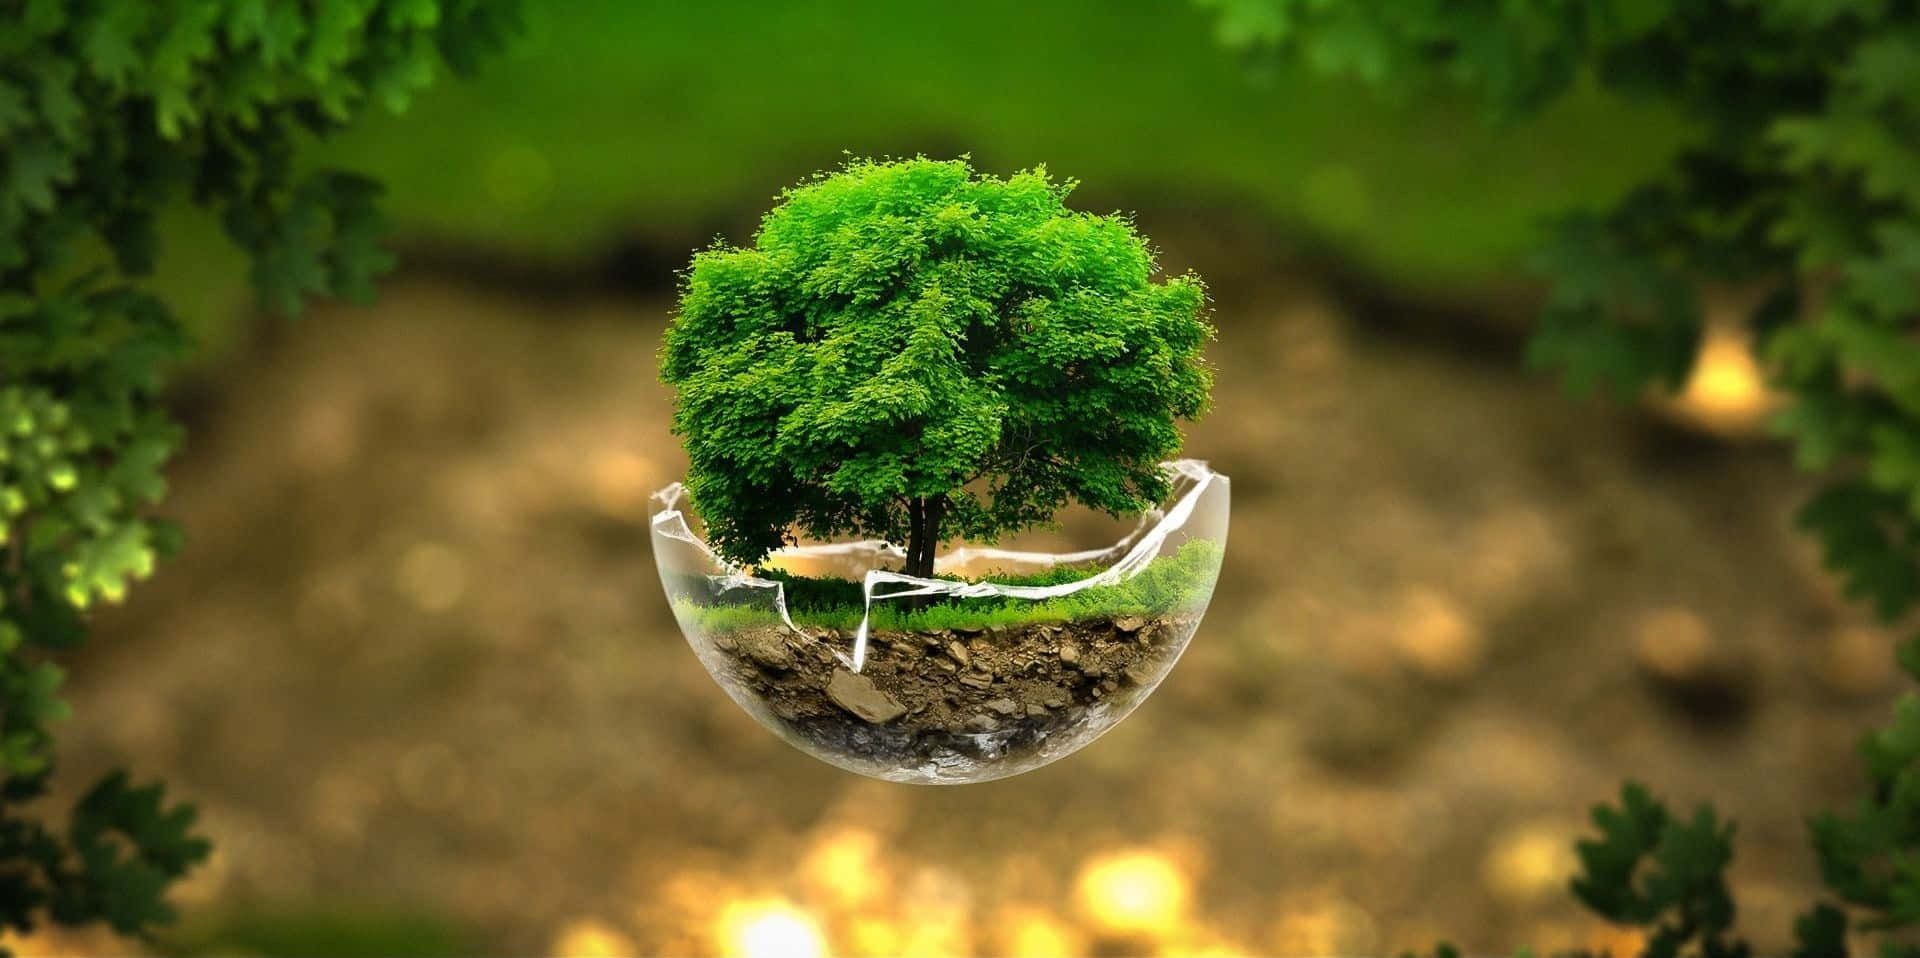 A Tree In A Glass Bowl With Grass And Dirt